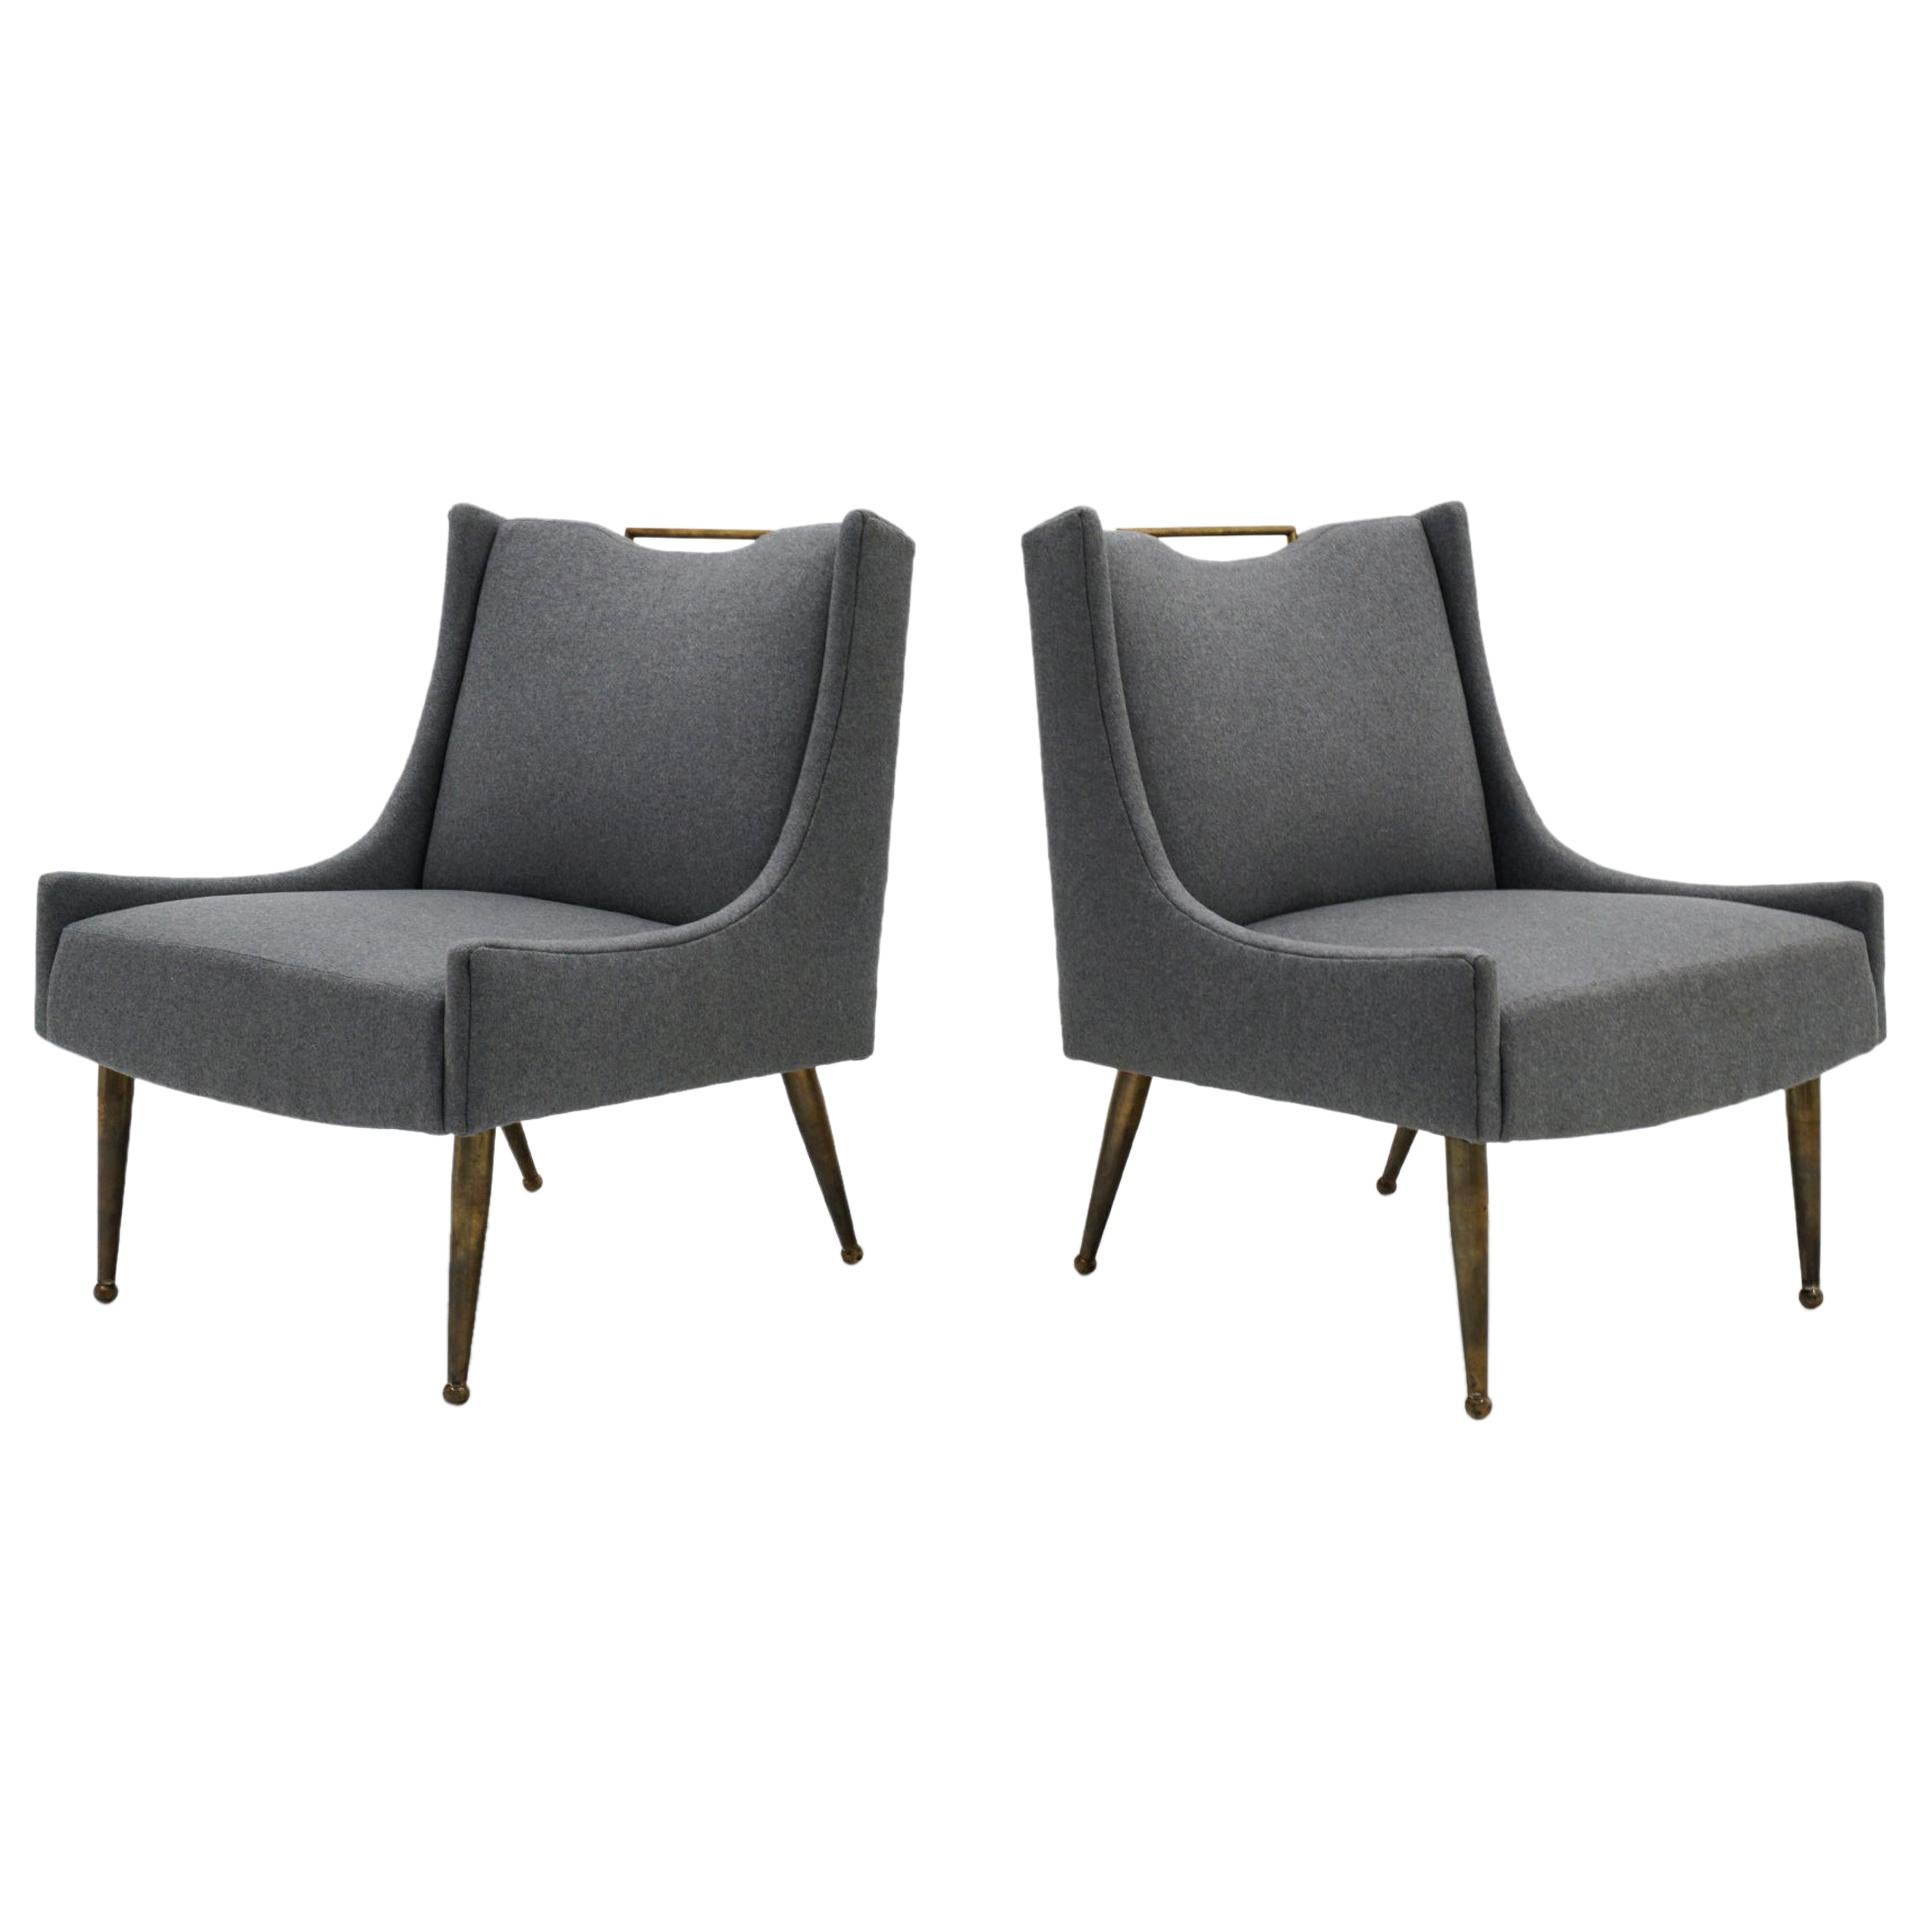 Pair of Italian Lounge Chairs, New Medium Gray Upholstery, Solid Brass Legs